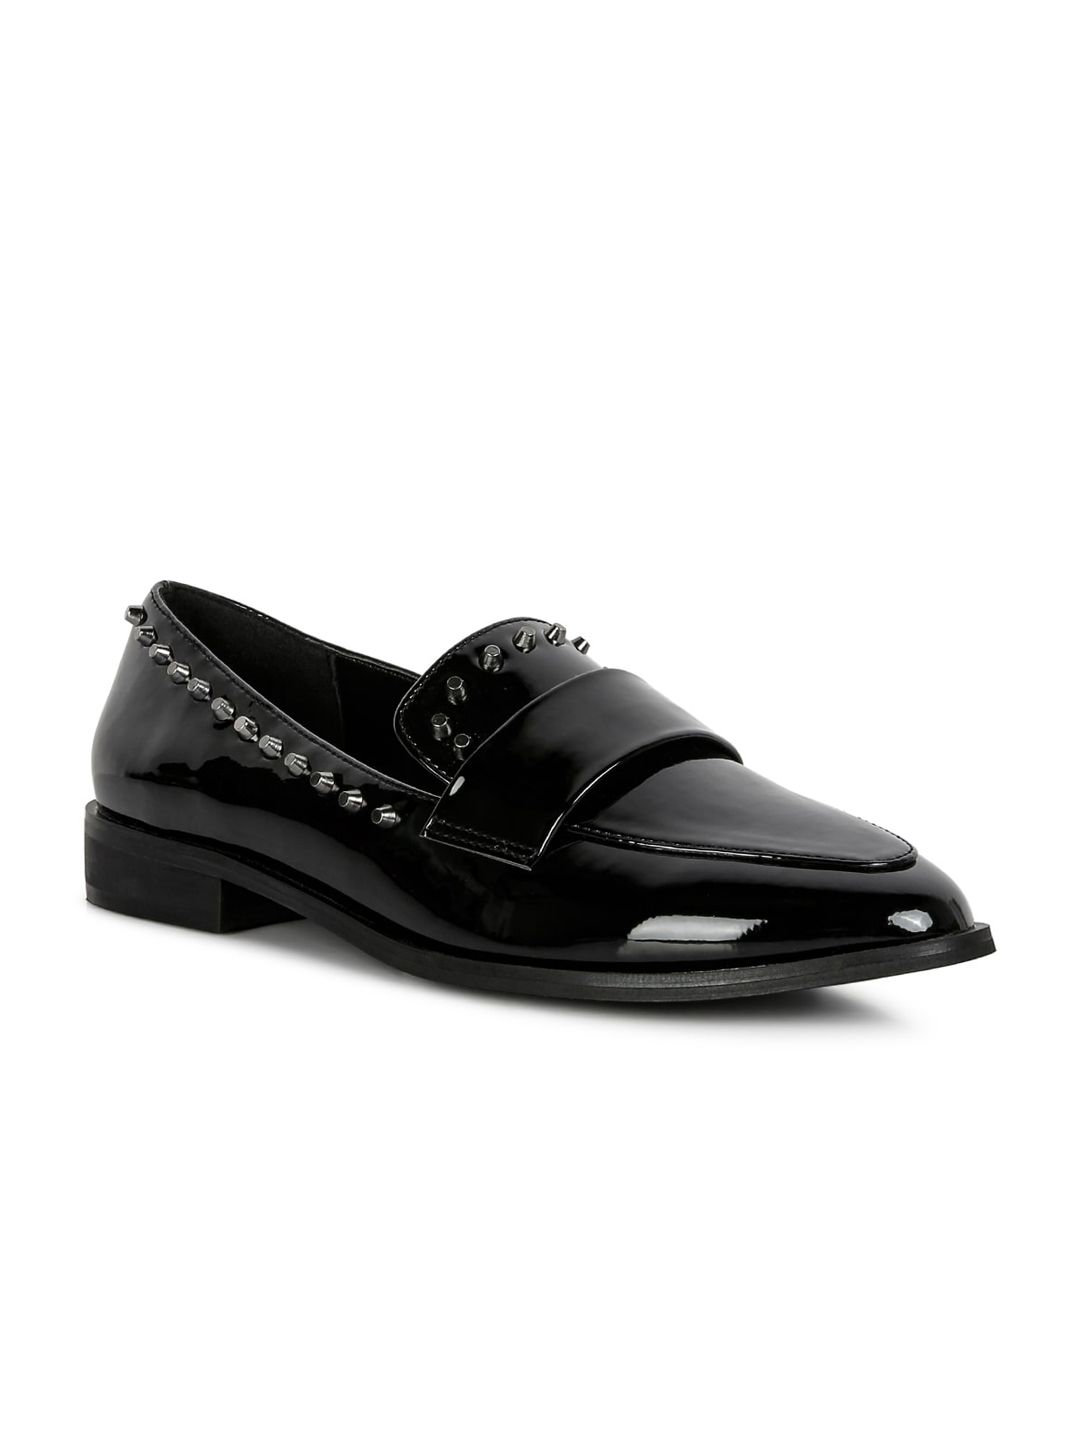 RAG & CO Women Stud Detail Slip-On Loafers Price in India